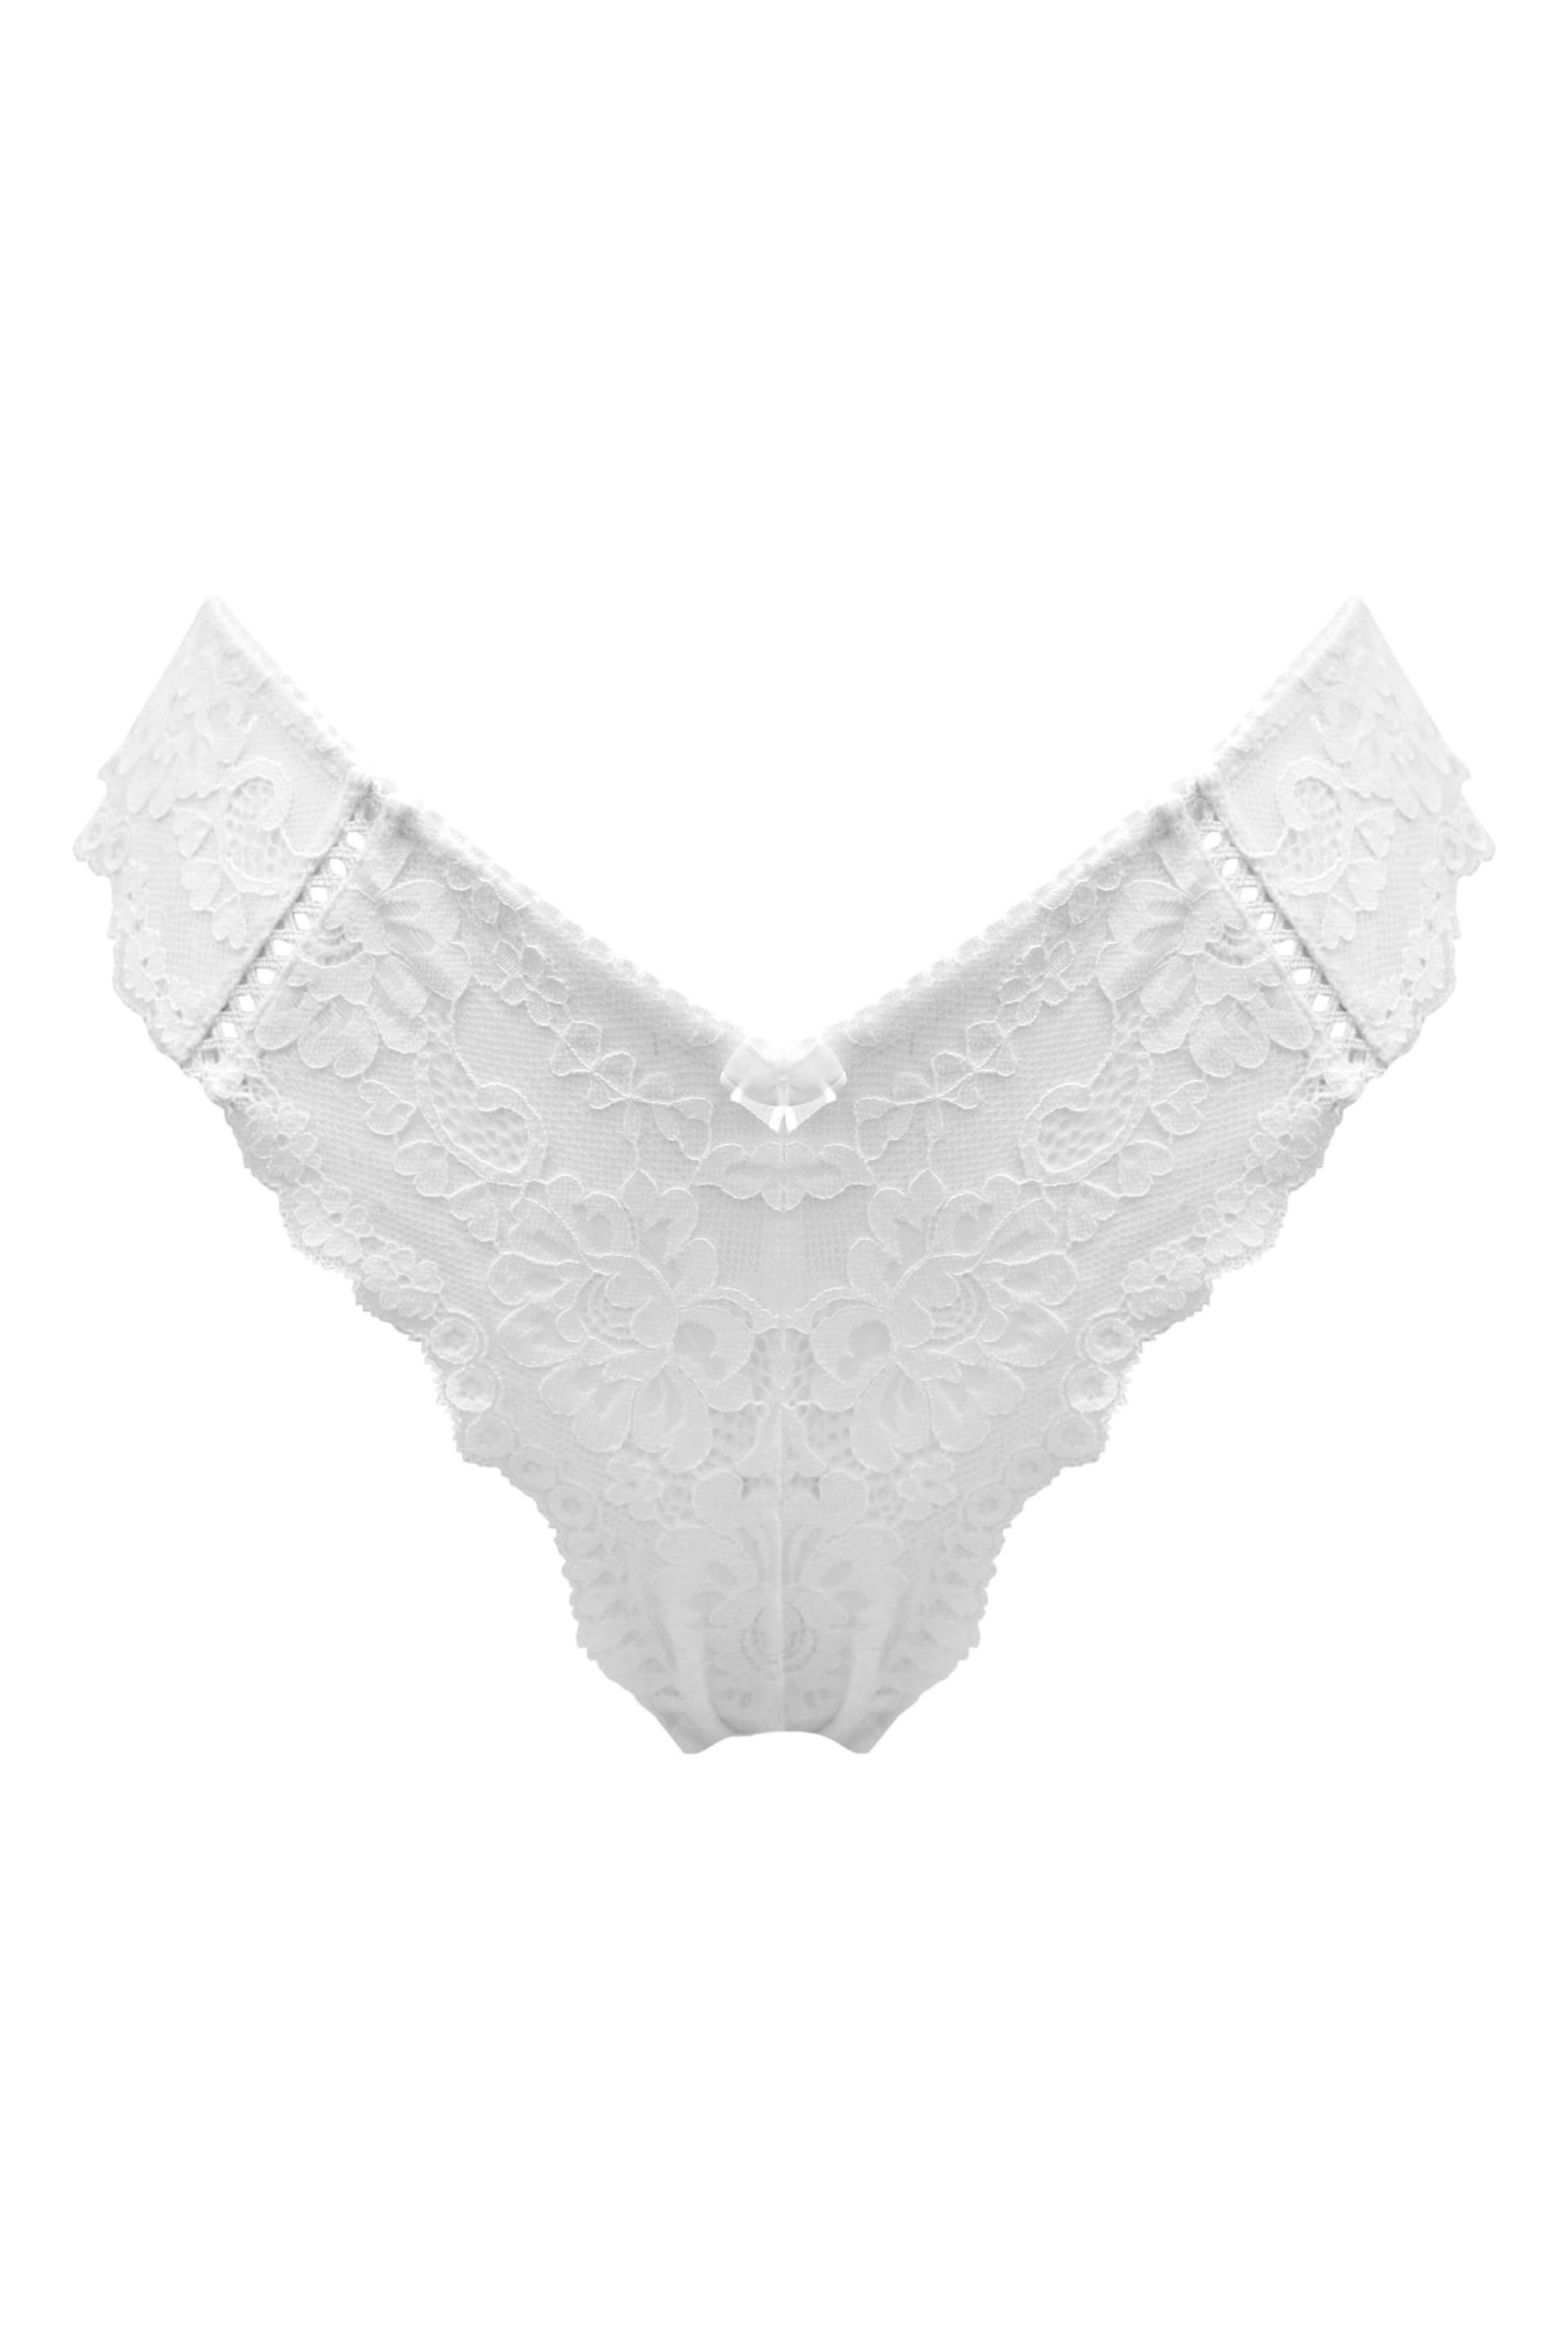 Pour Moi White Fleur Cheeky V-Shaped Briefs - Image 3 of 4